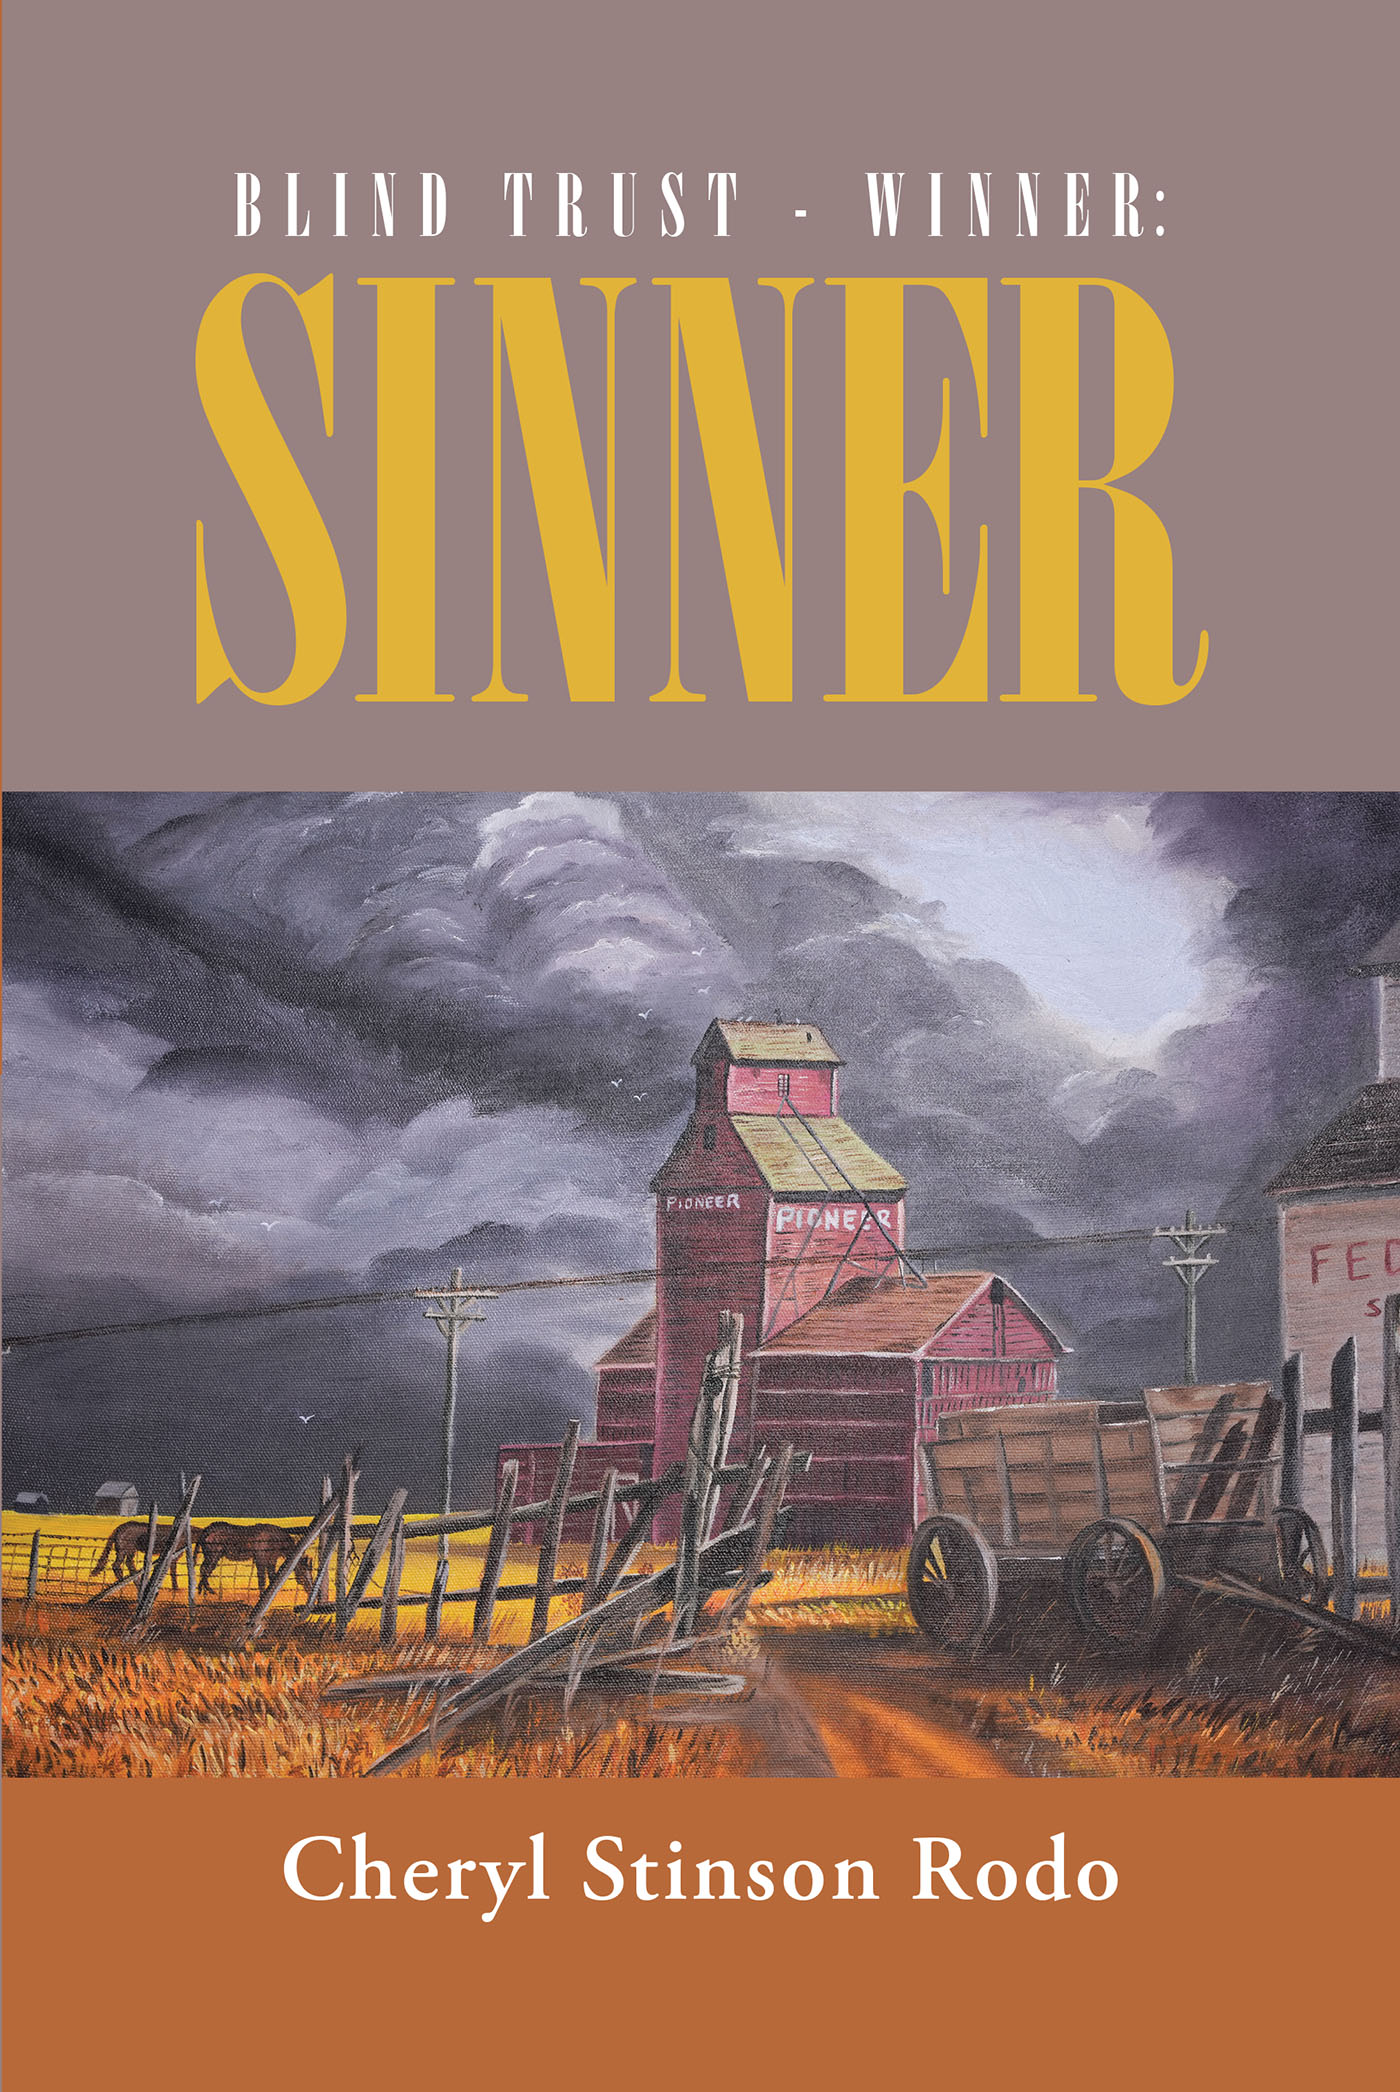 Author Cheryl Stinson Rodo’s New Book, "Blind Trust - Winner: Sinner," Introduces Carmen, an Undocumented Immigrant Who is Hired by a Beloved Local Veterinarian